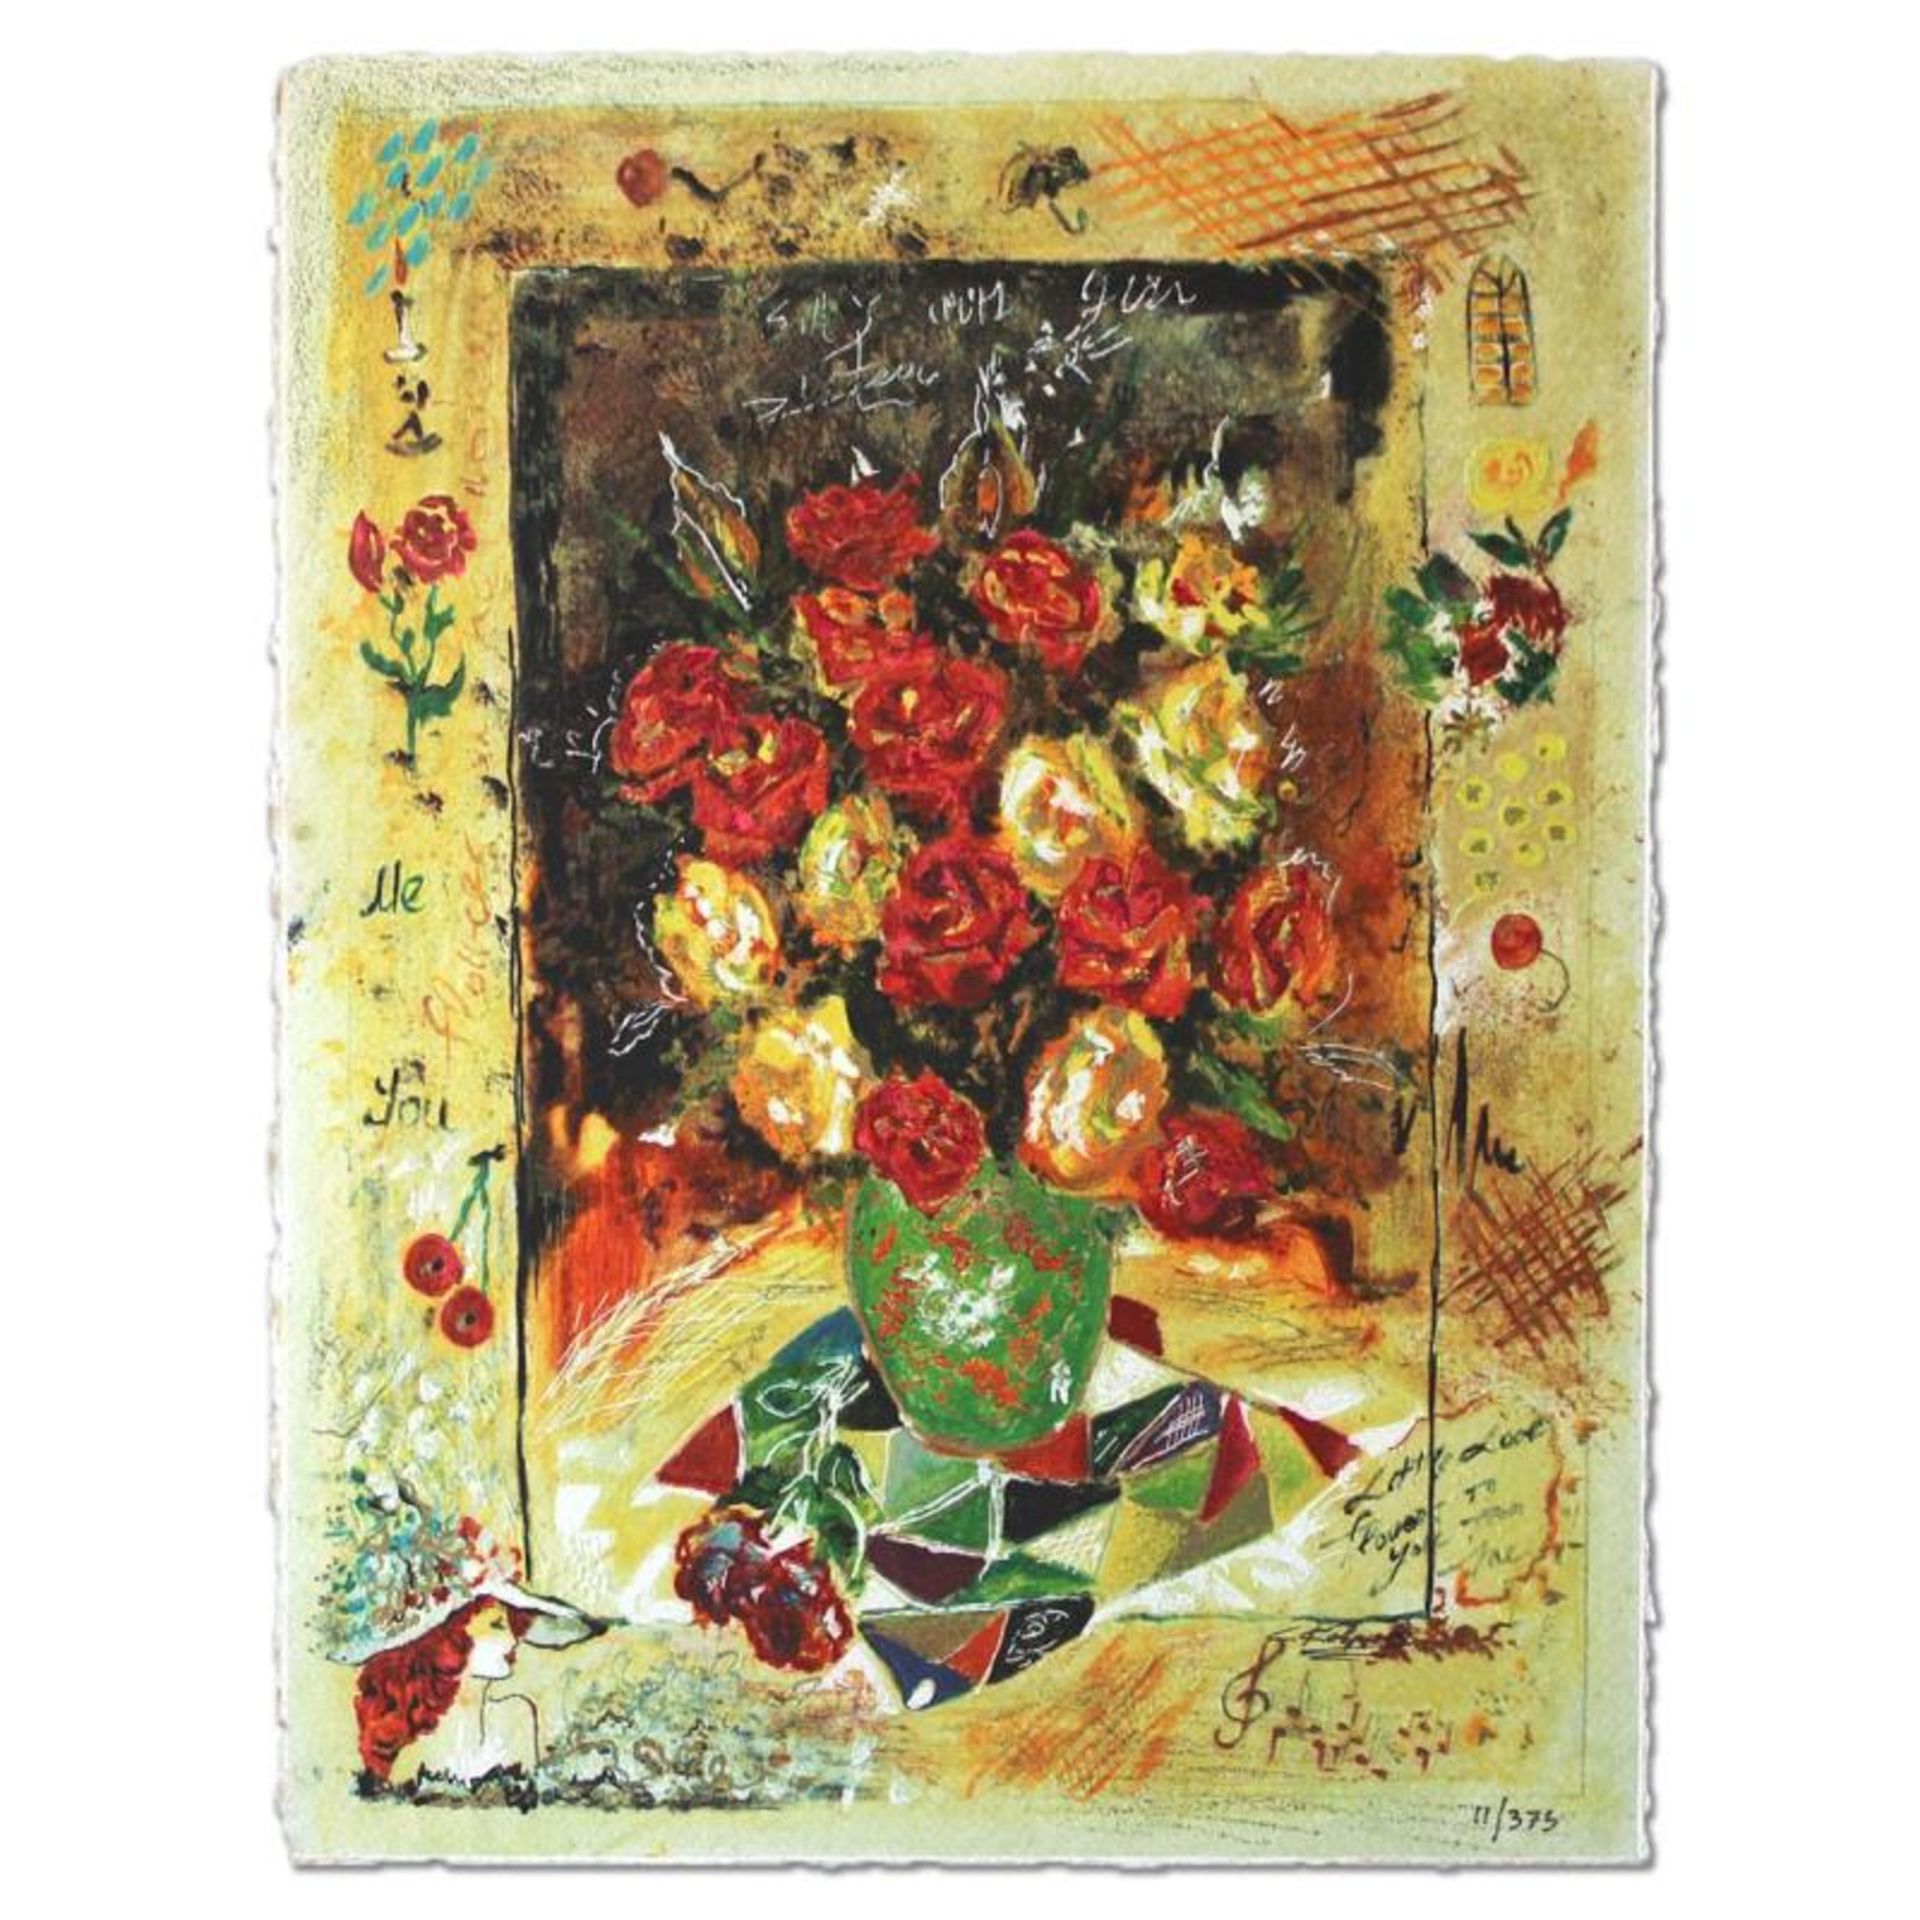 Sergey Kovrigo, "Red Bouquet" Hand Signed Limited Edition Serigraph with Letter